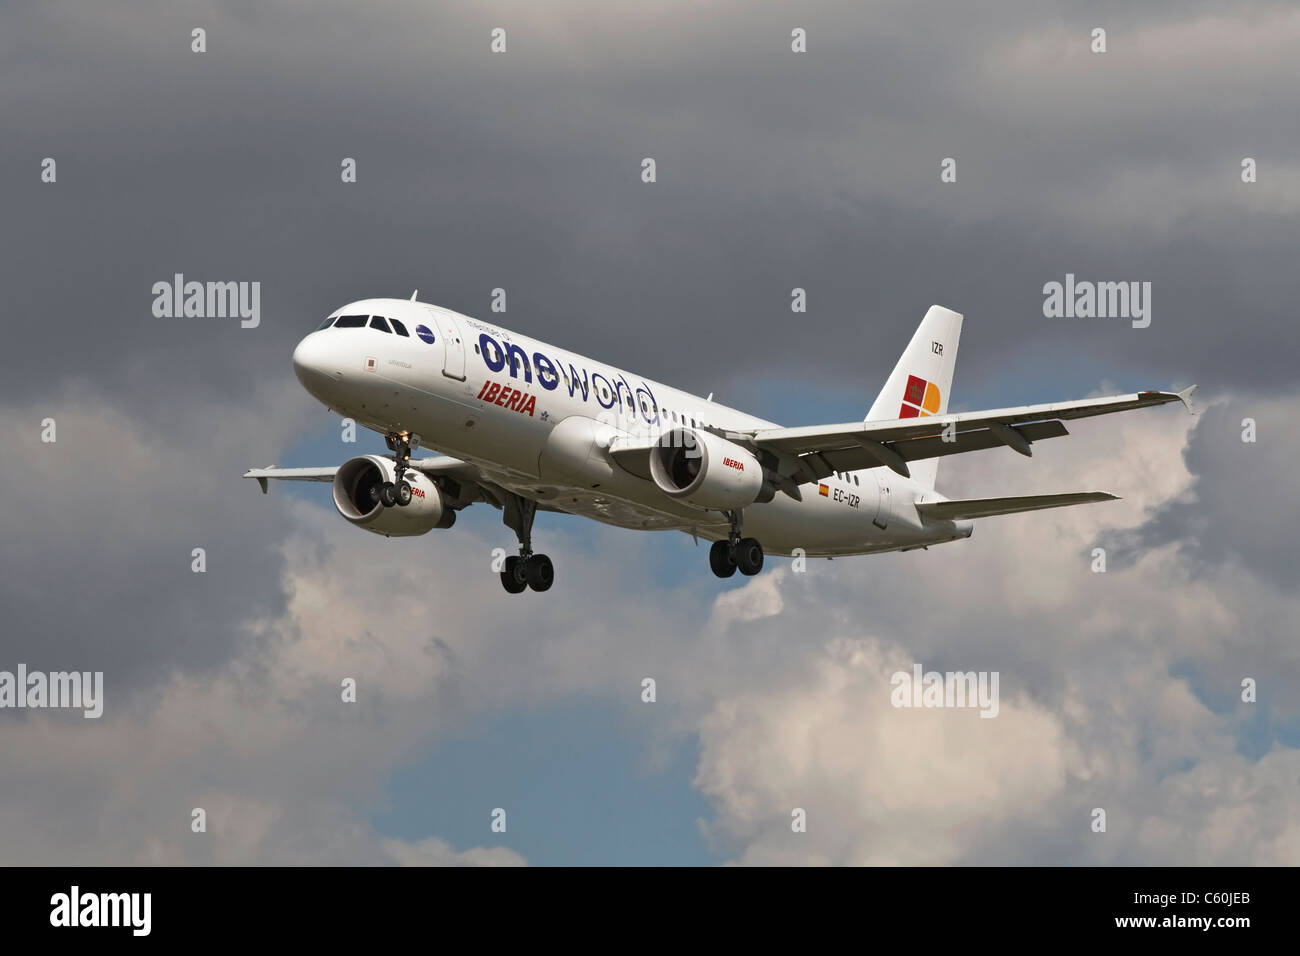 An Airbus A320 of the Spanish airline Iberia - One World alliance on final approach Stock Photo